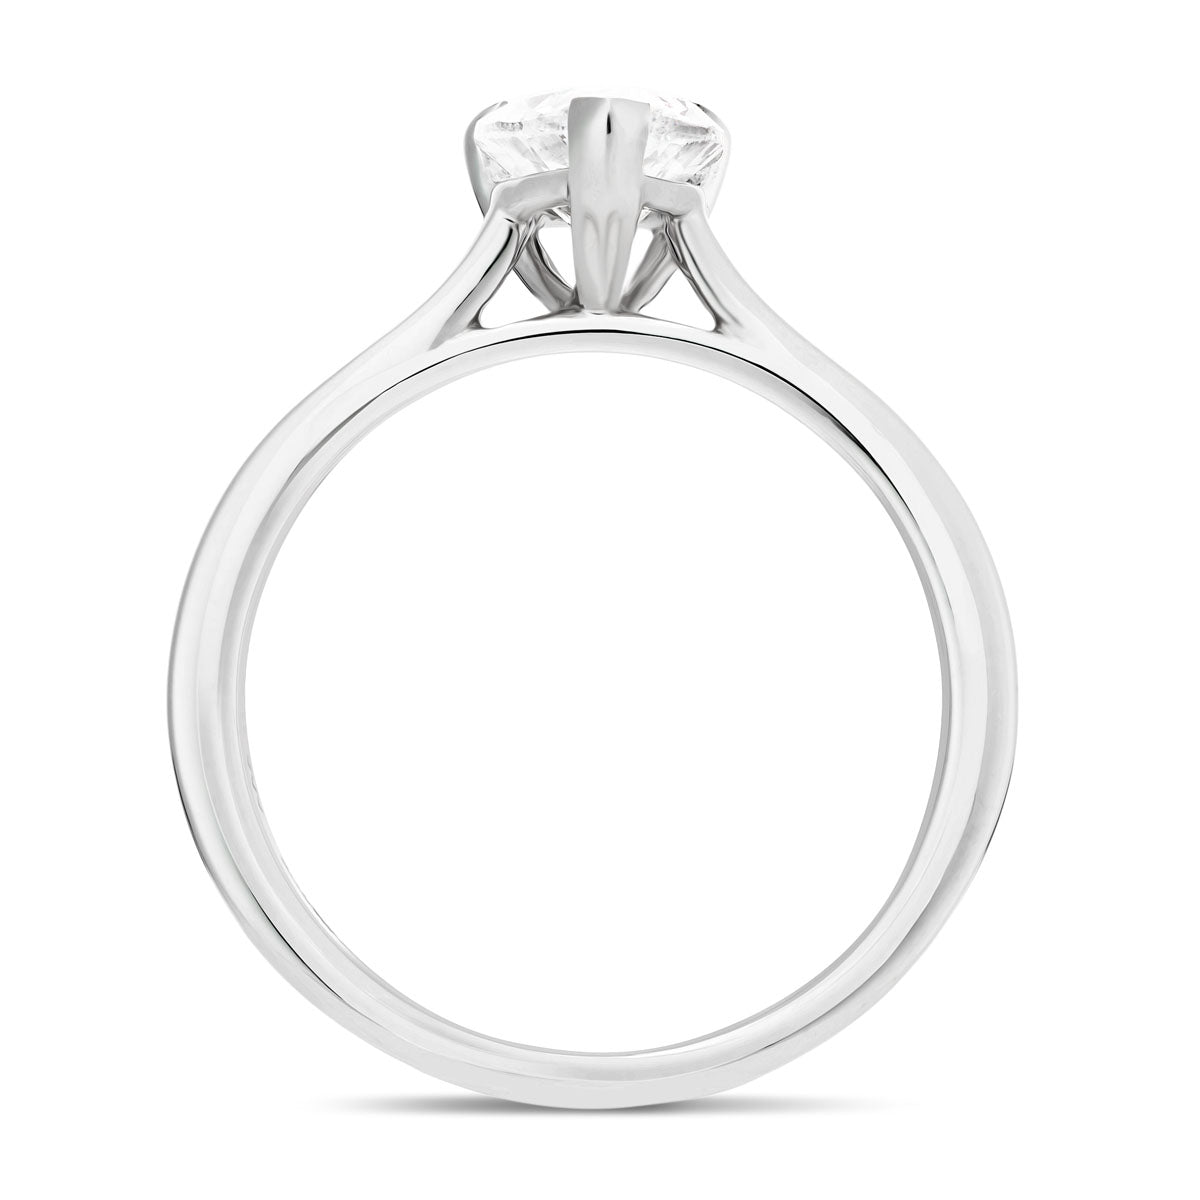 Certified Diamond Pear Solitaire Engagement Ring 0.70ct G/SI 18k White Gold - All Diamond